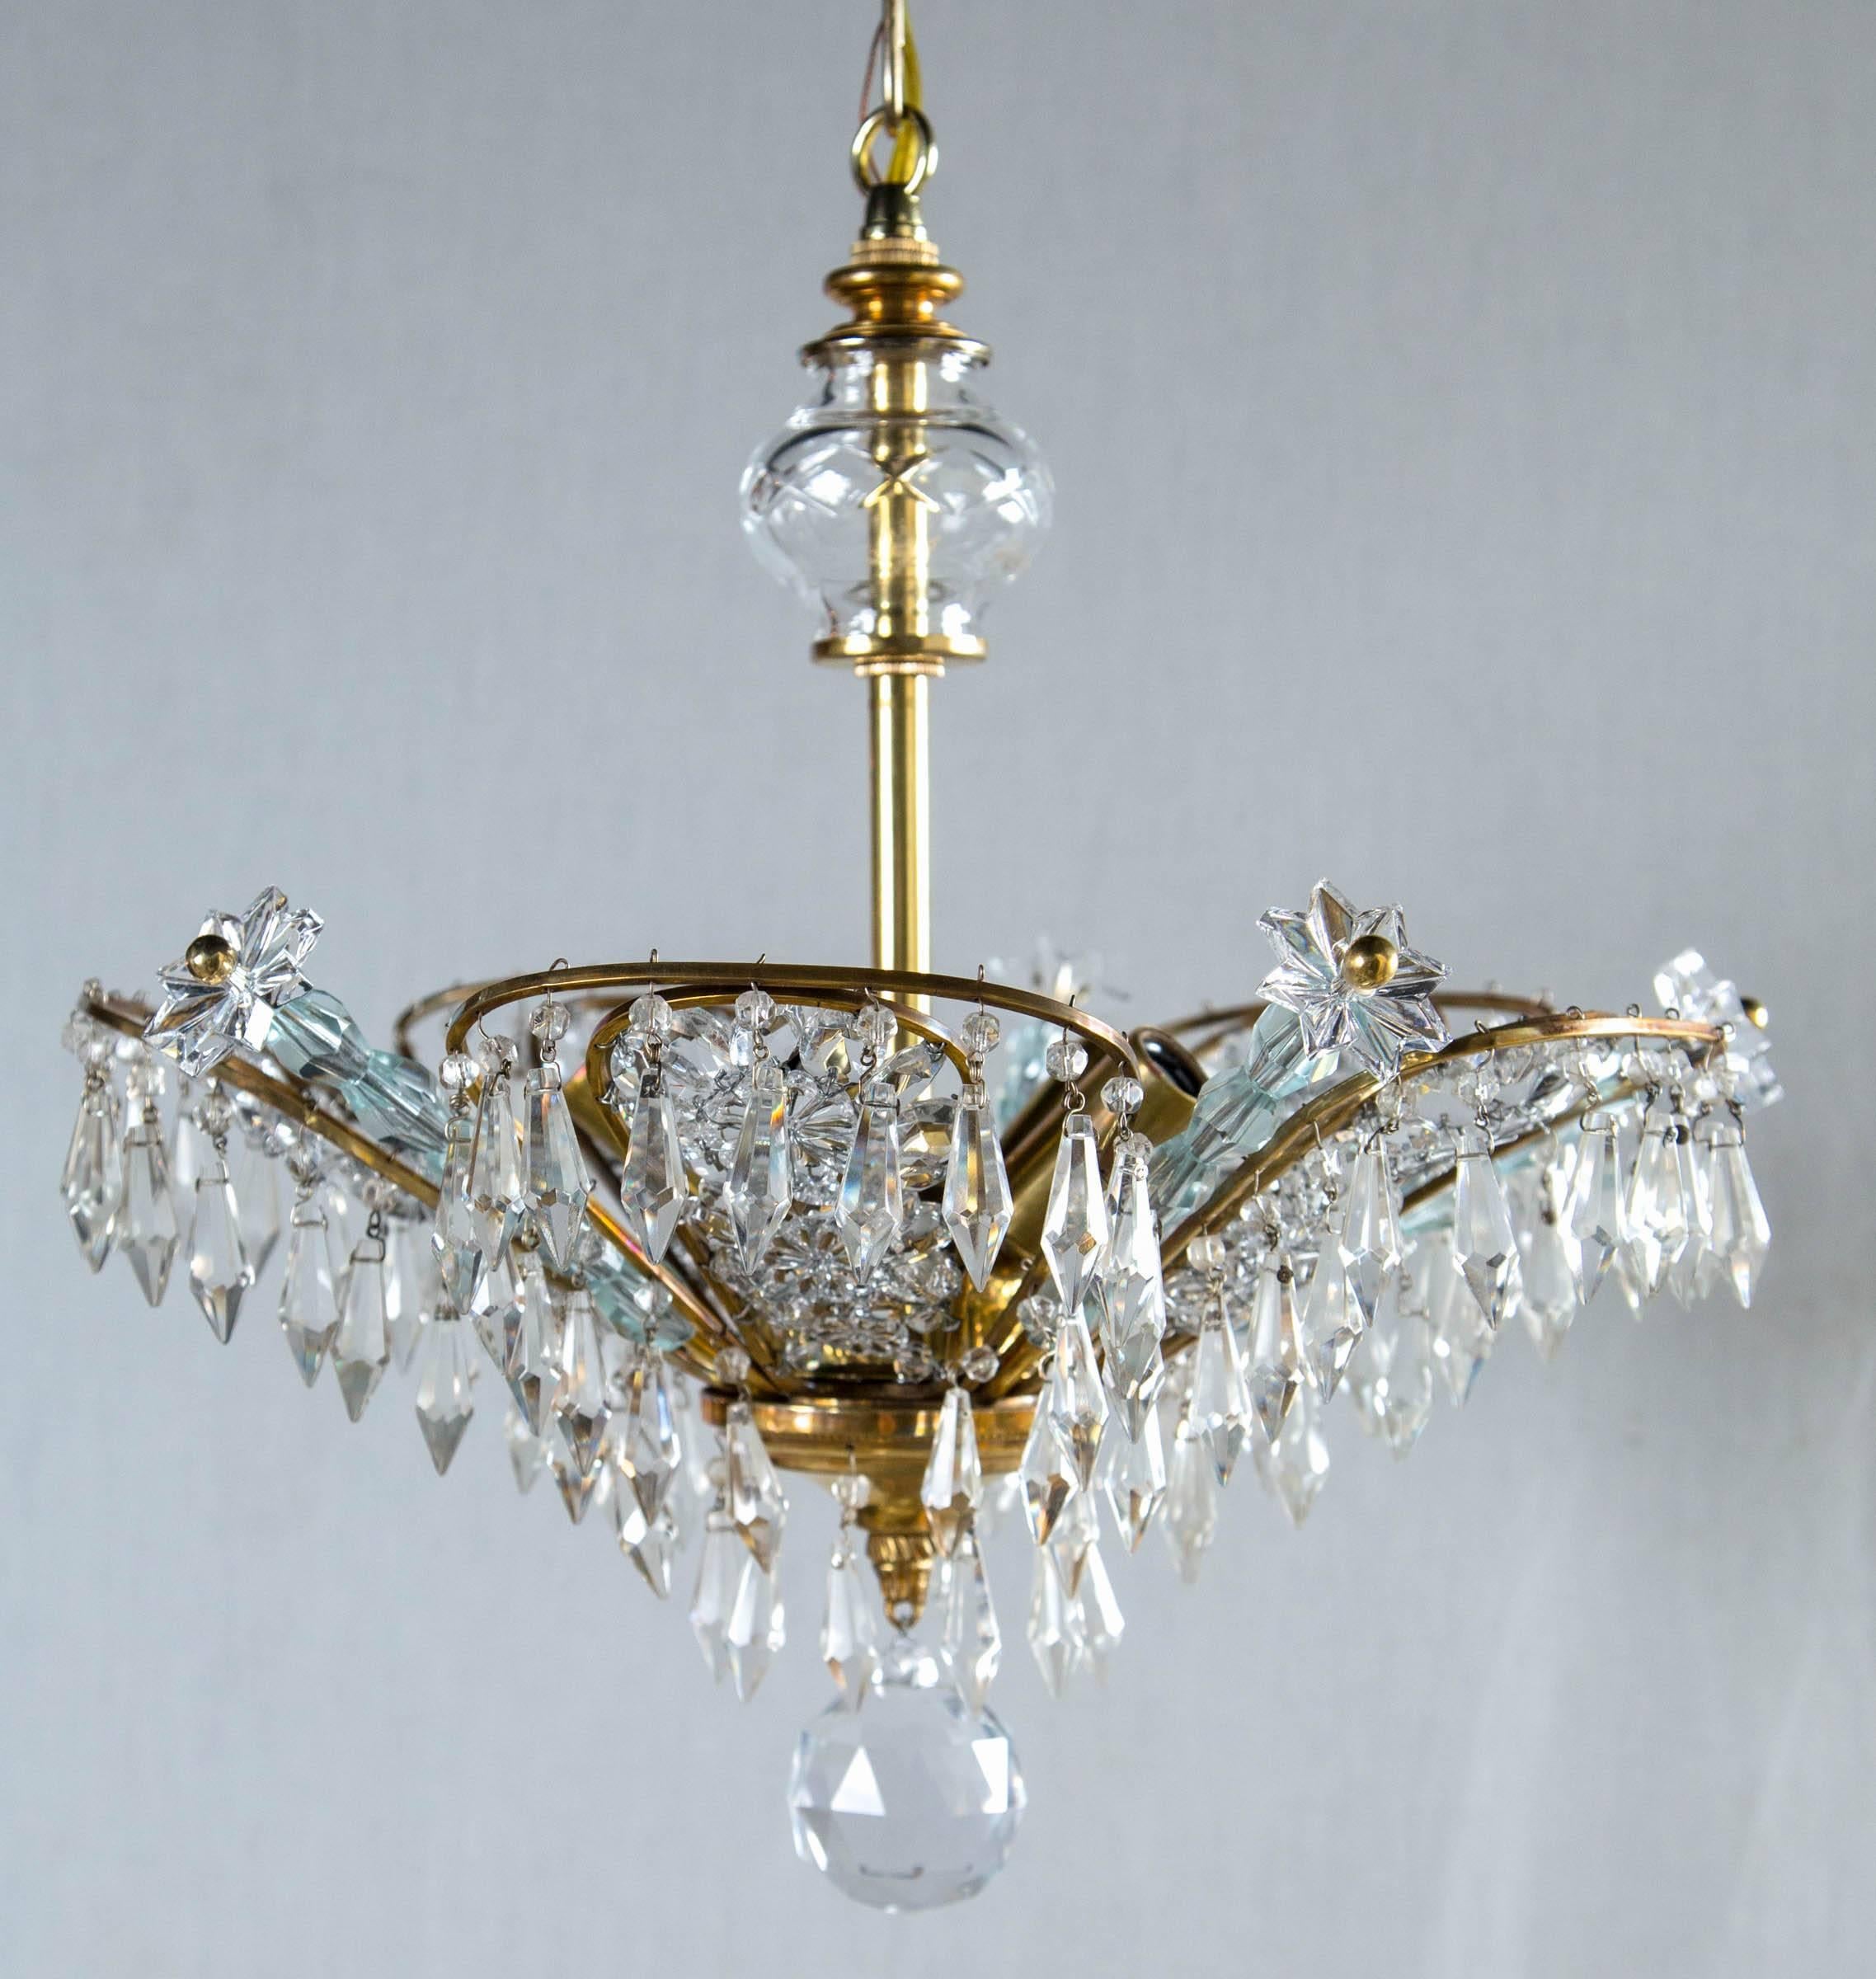 French Bagues light fixture with crystal drops, circa 1930s. Four fixtures available. Priced per fixture.